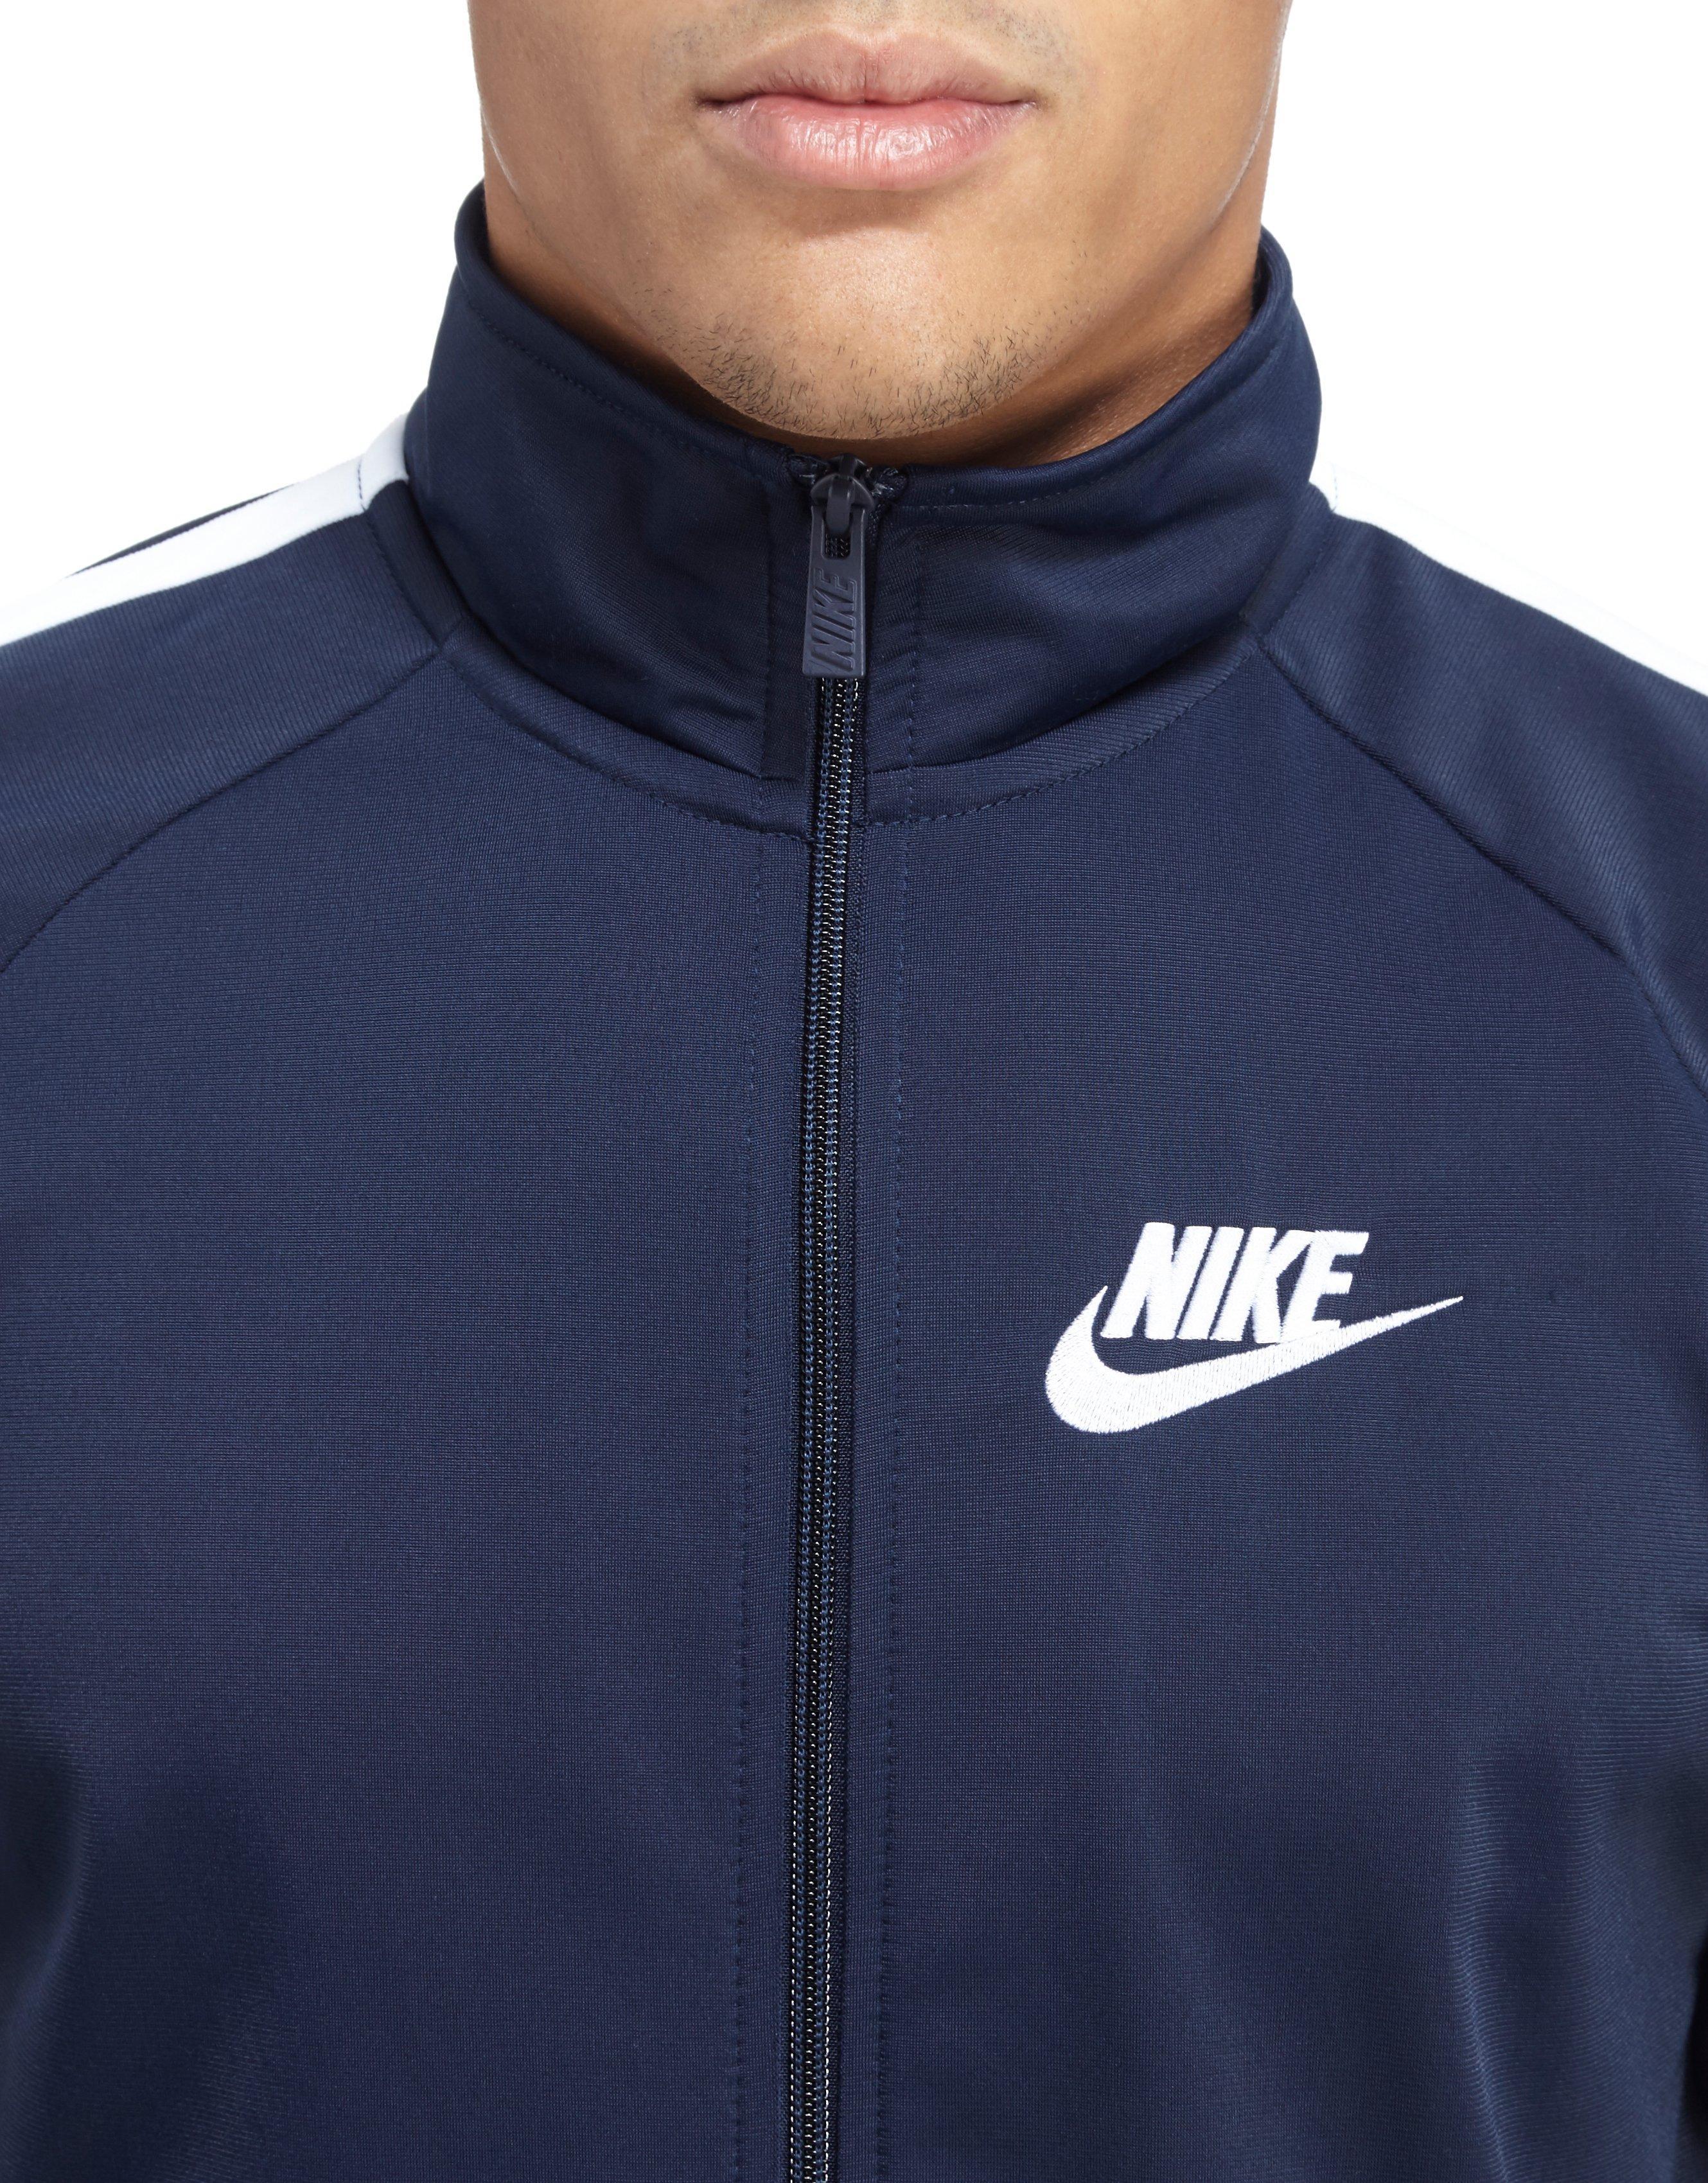 Nike Synthetic Season Poly Tracksuit in Navy/White (Blue) for Men - Lyst